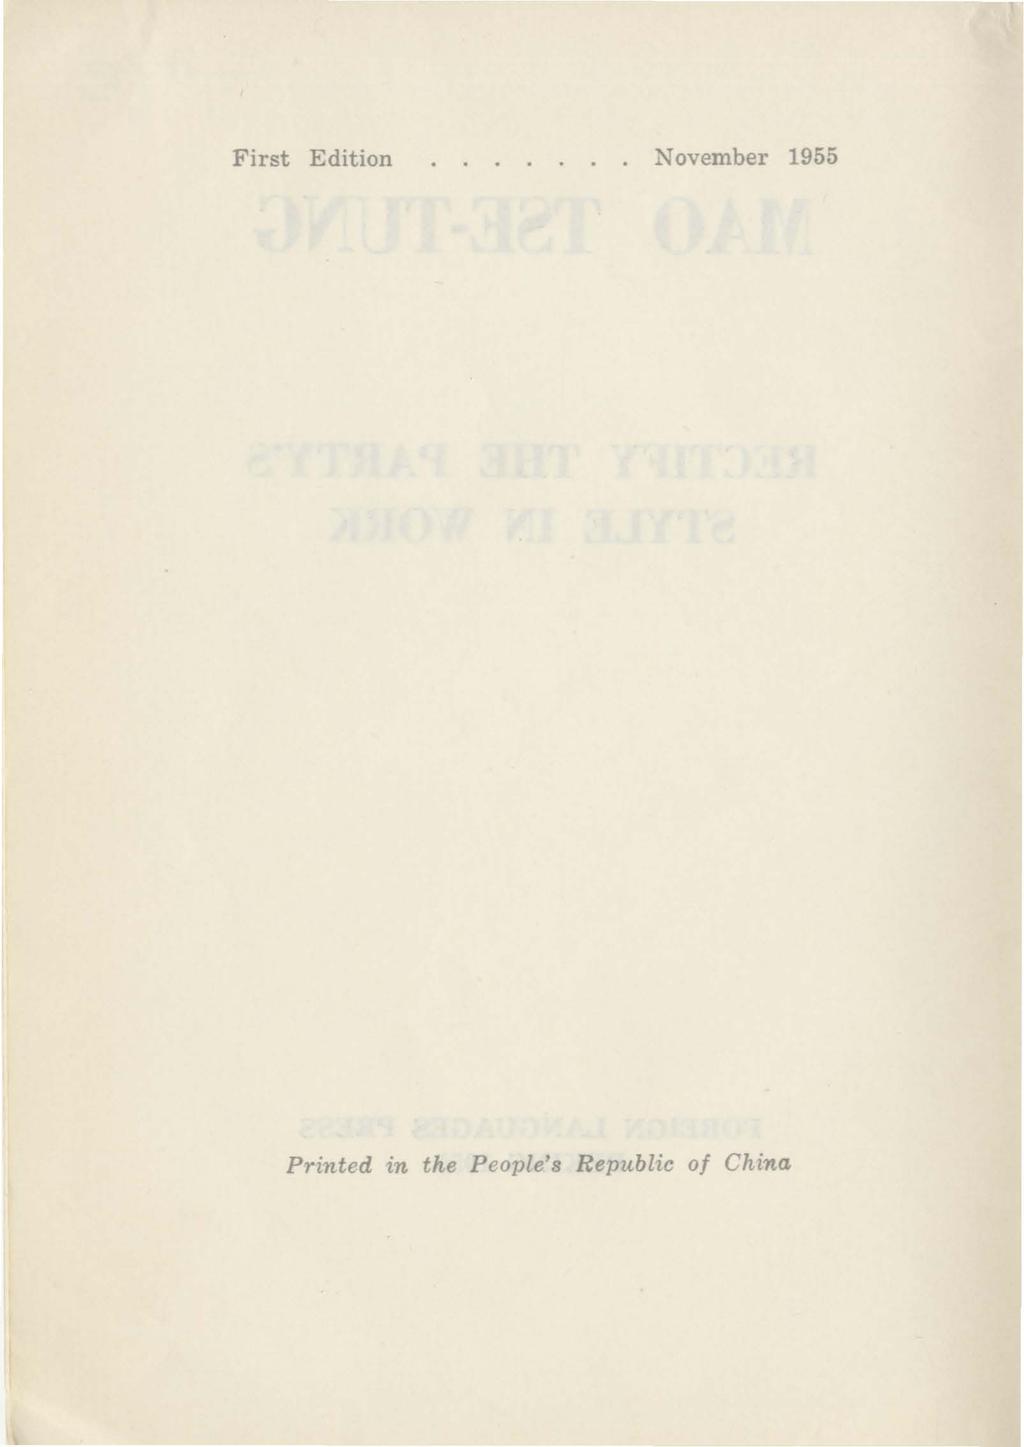 First Edition.